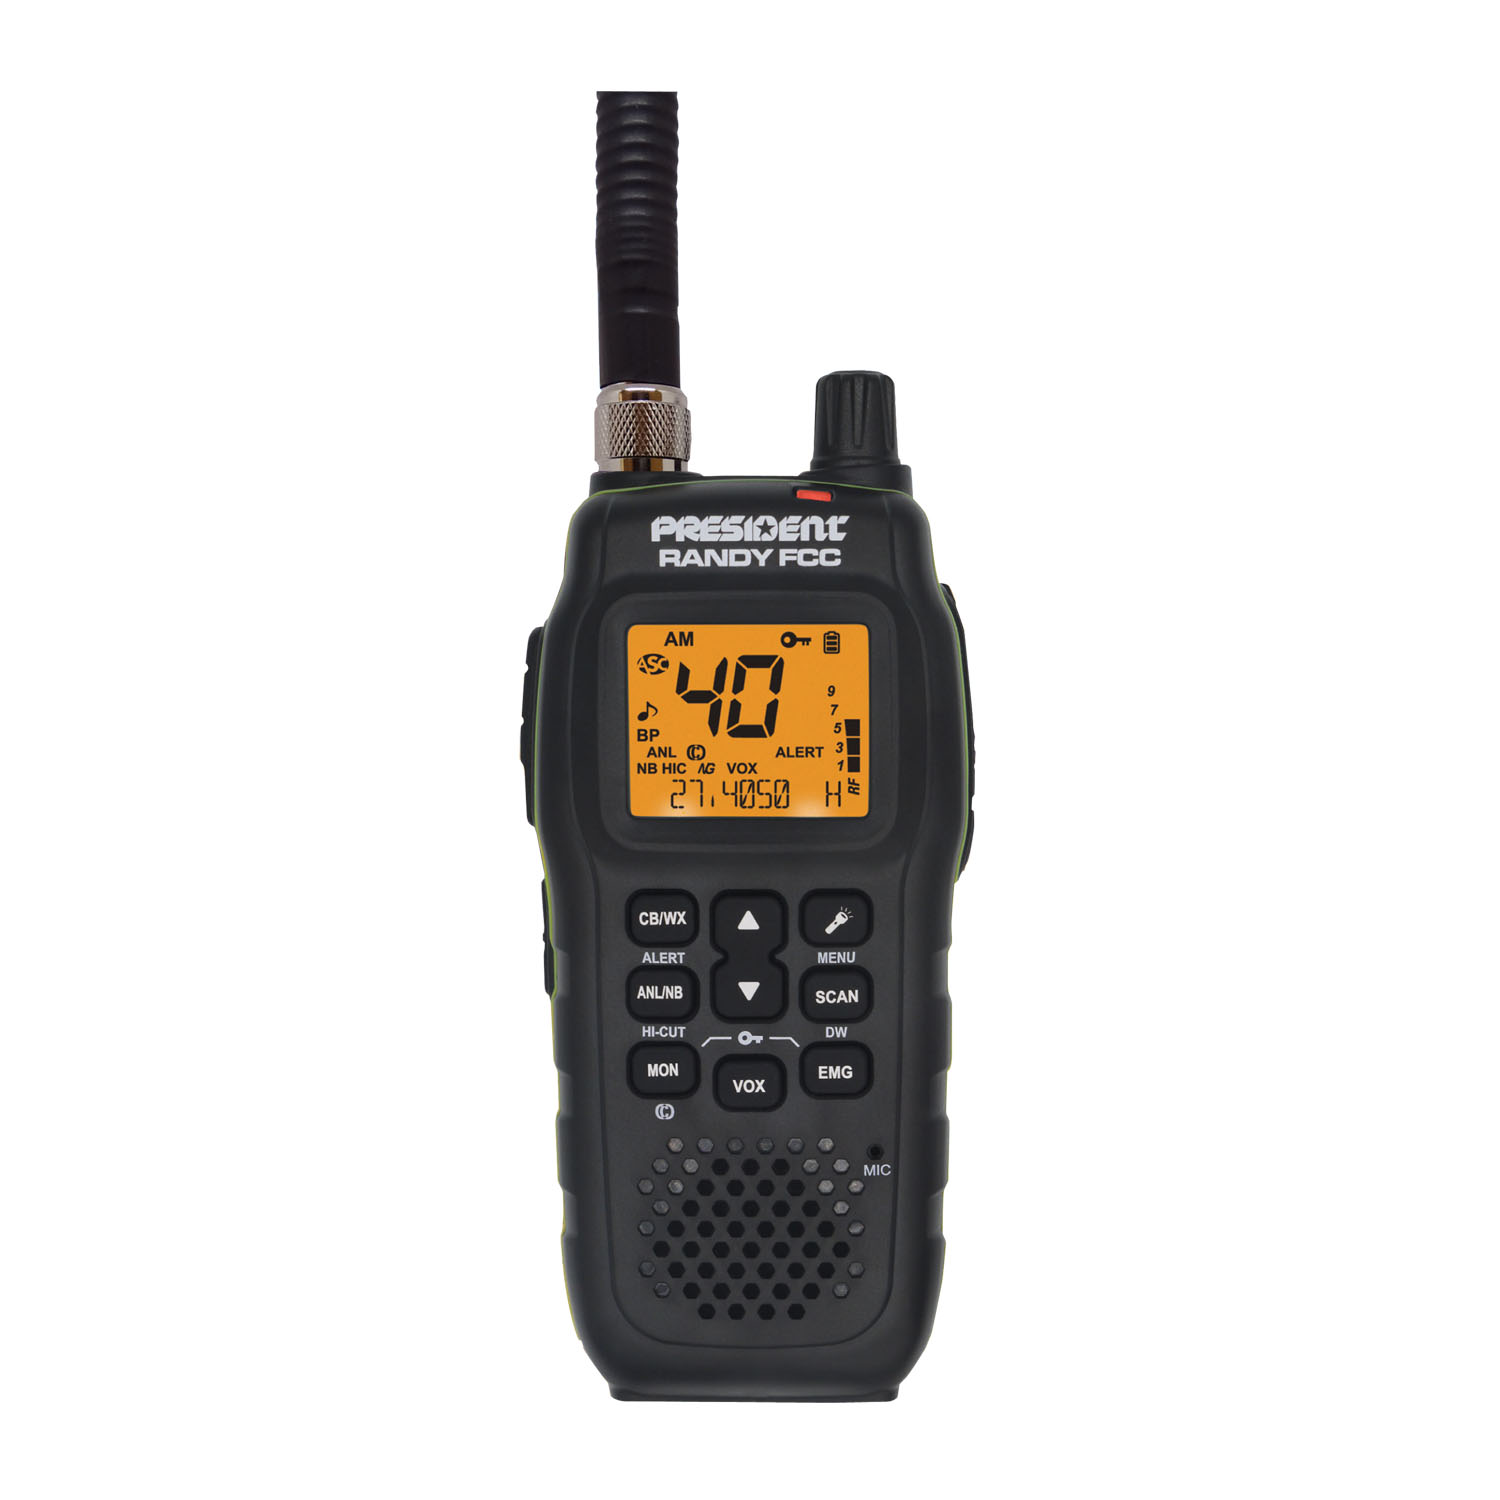 PRESIDENT - RANDY FCC 40 CHANNEL HANDHELD CB RADIO WITH WEATHER, SCAN & VOX